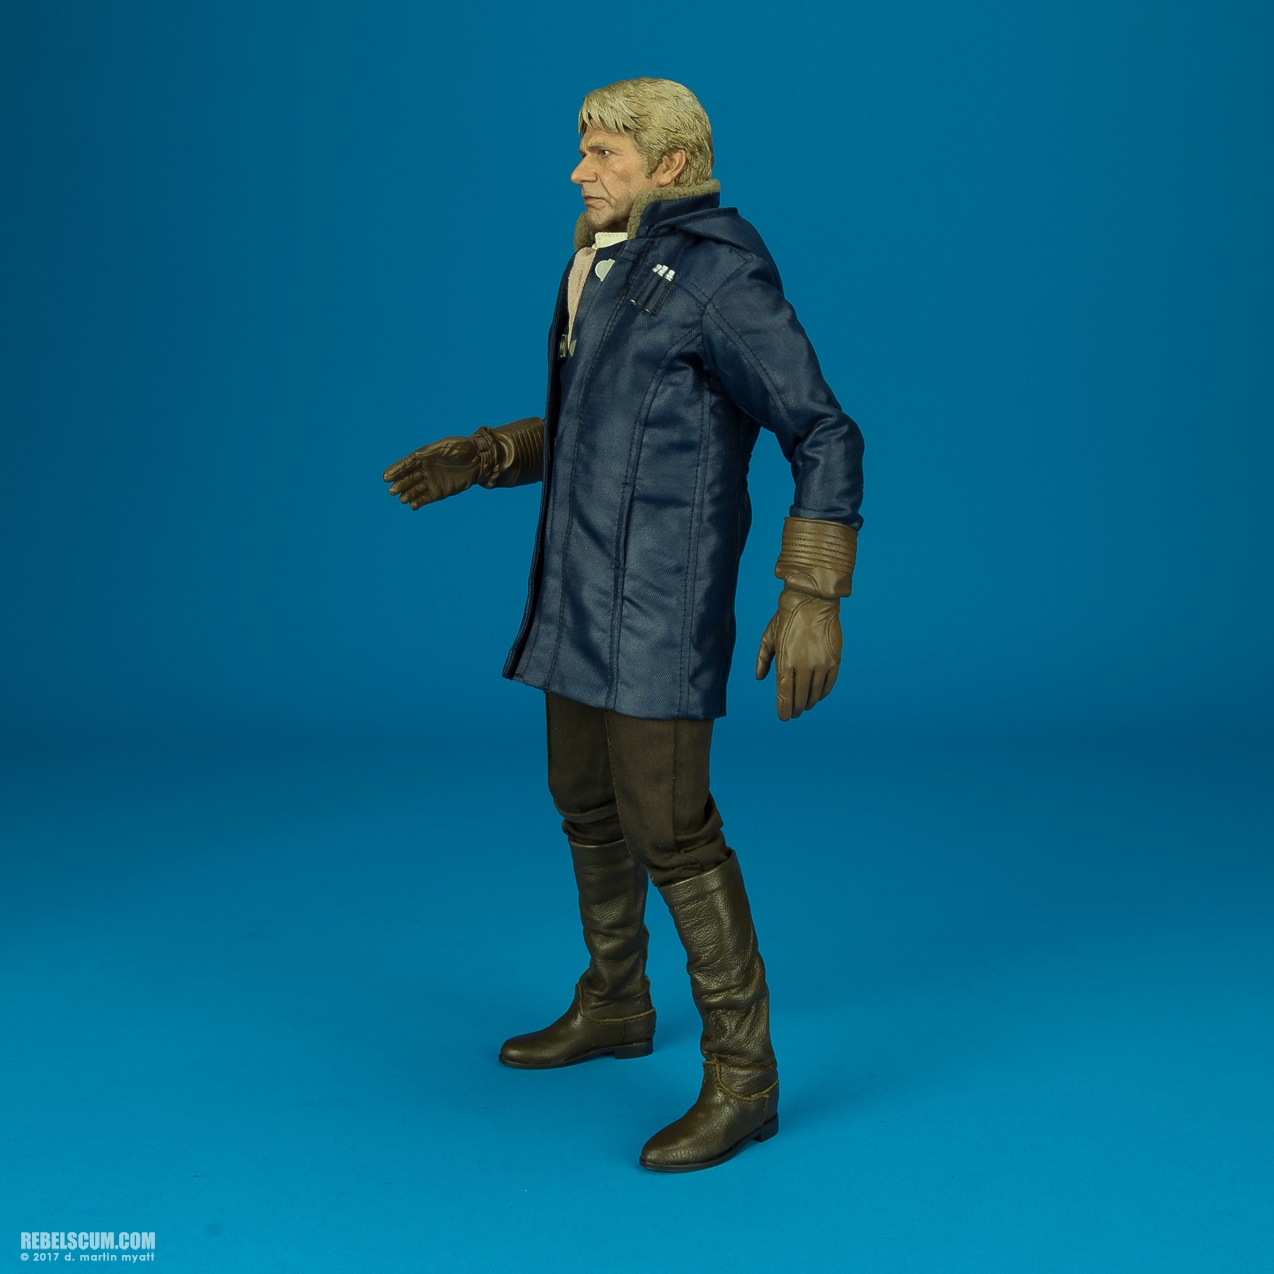 MMS376-Han-Solo-Chewbacca-The-Force-Awakens-Hot-Toys-007.jpg